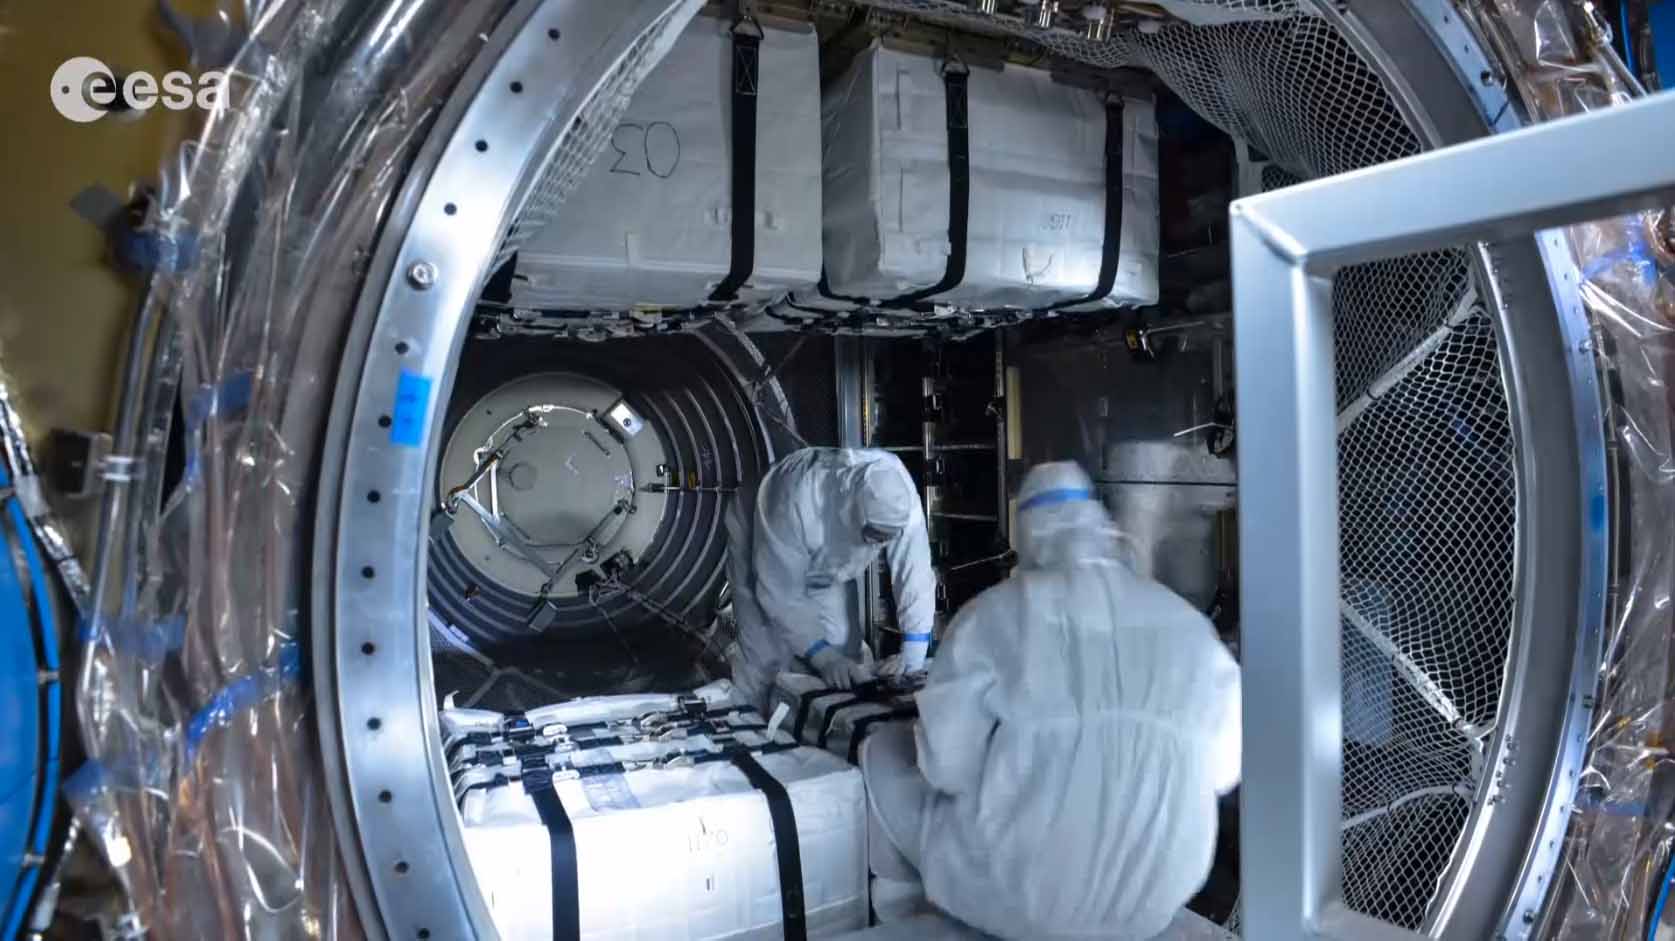 Timelapse Video Shows That Packing For Space Is Pretty Complicated